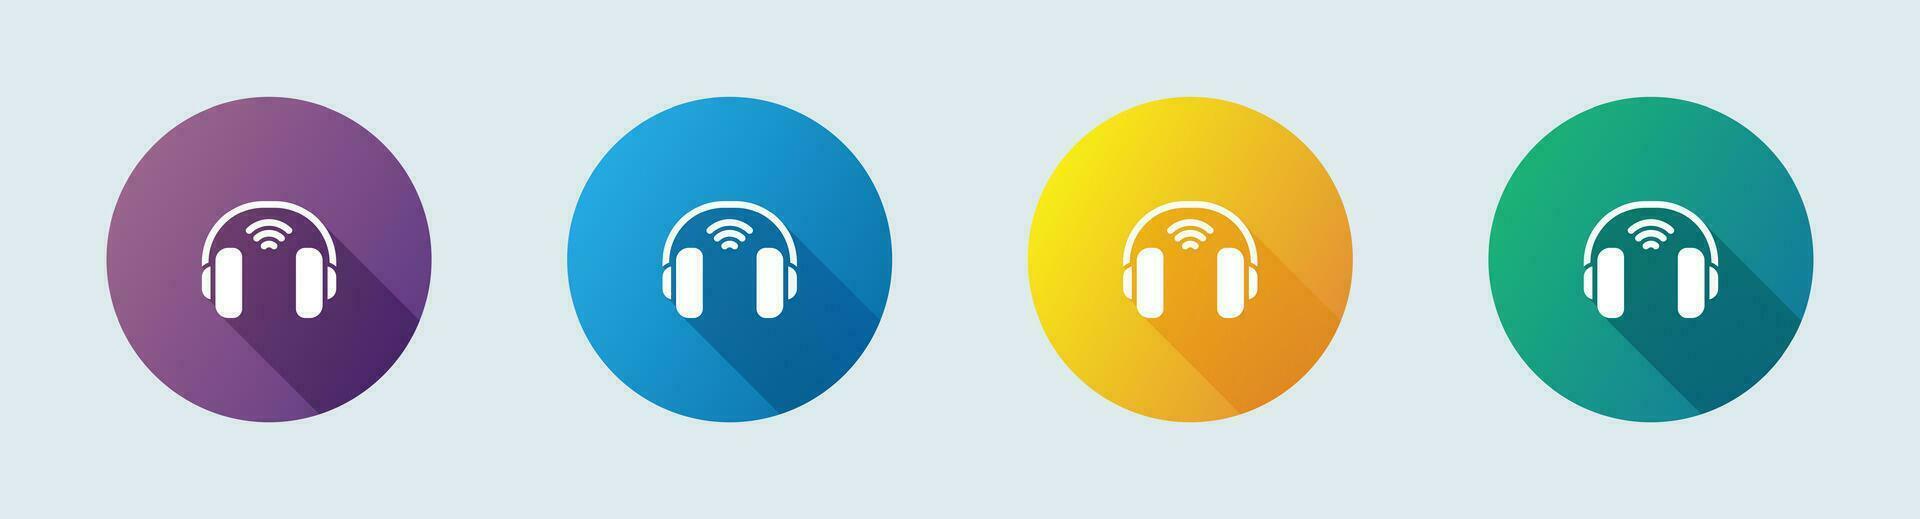 Wireless headphone solid icon in flat design style. Earphones signs vector illustration.